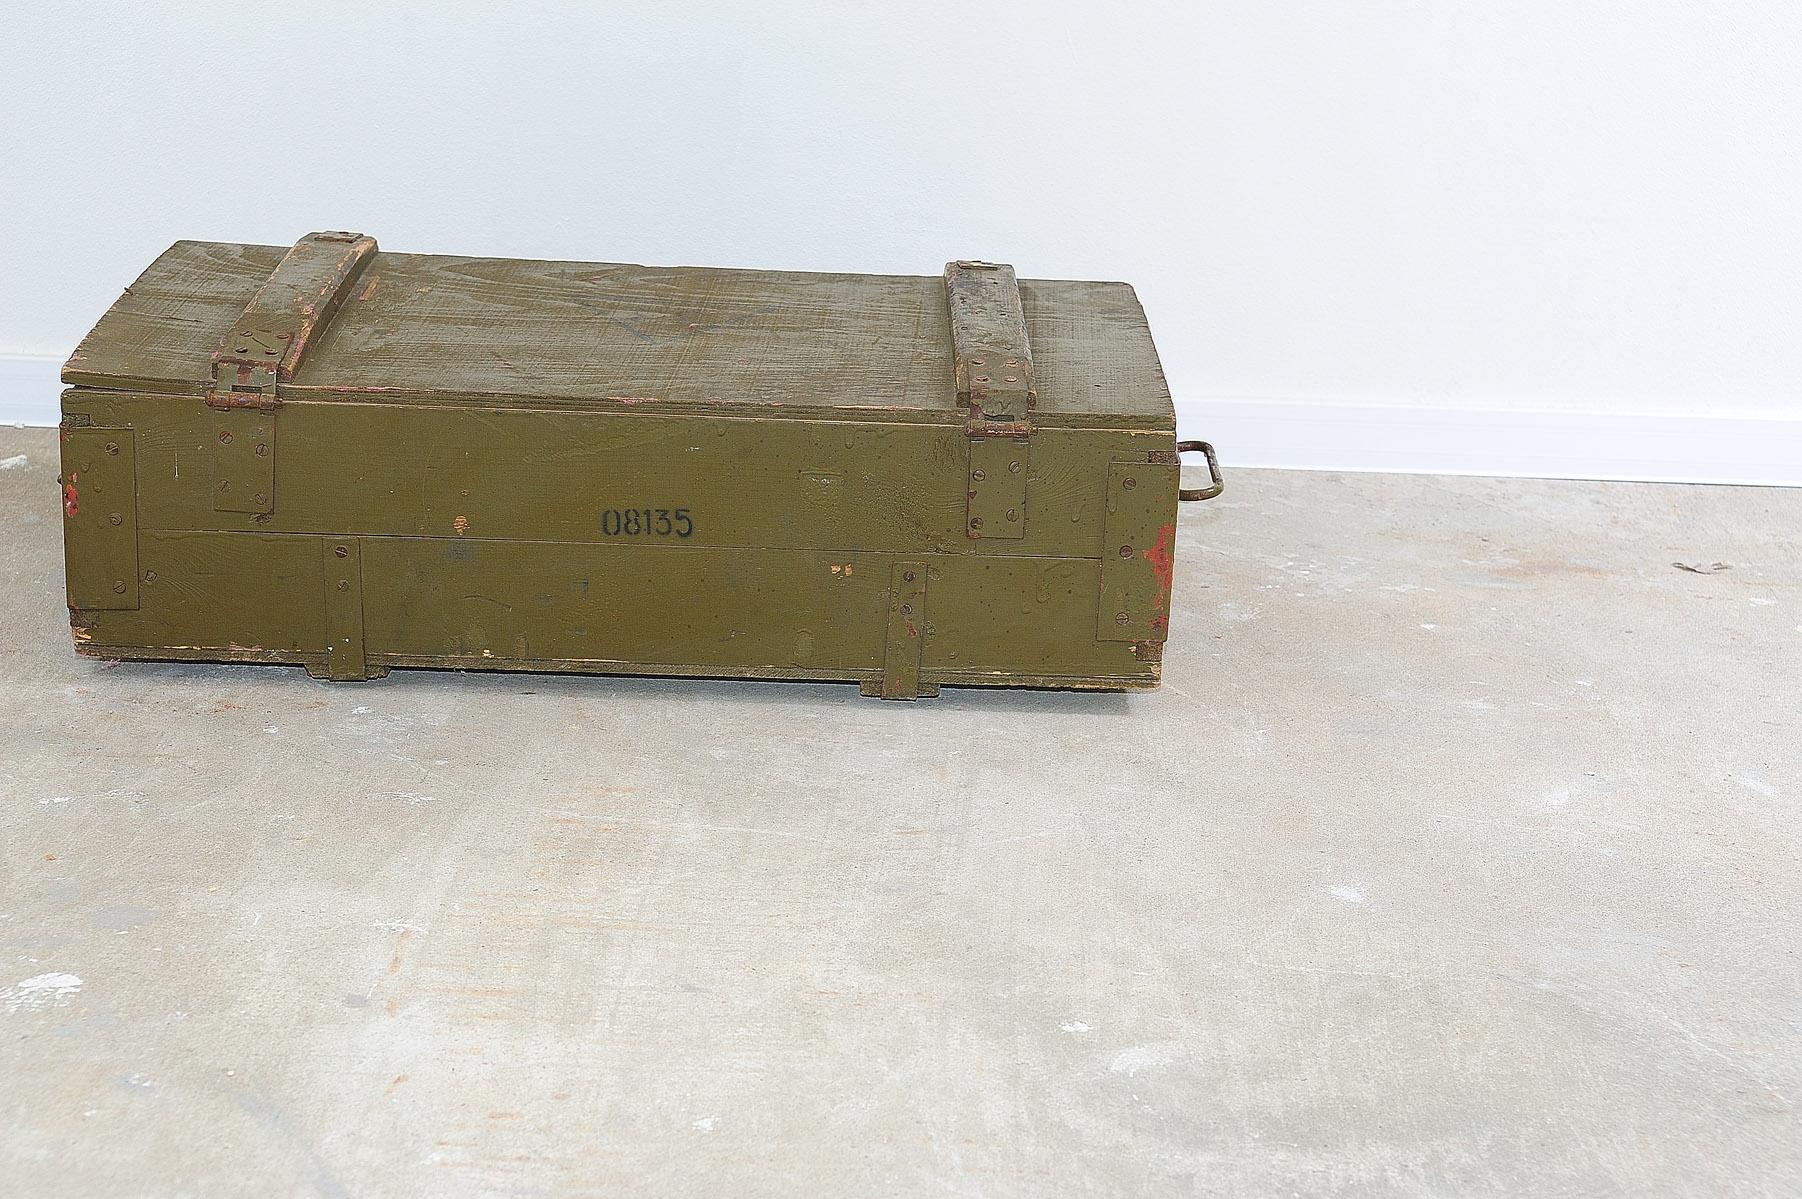 Vintage military crate, made in the former Soviet Union in the 1980´s.

Original paint, shows signs of age and wear, but generally in good Vintage condition.